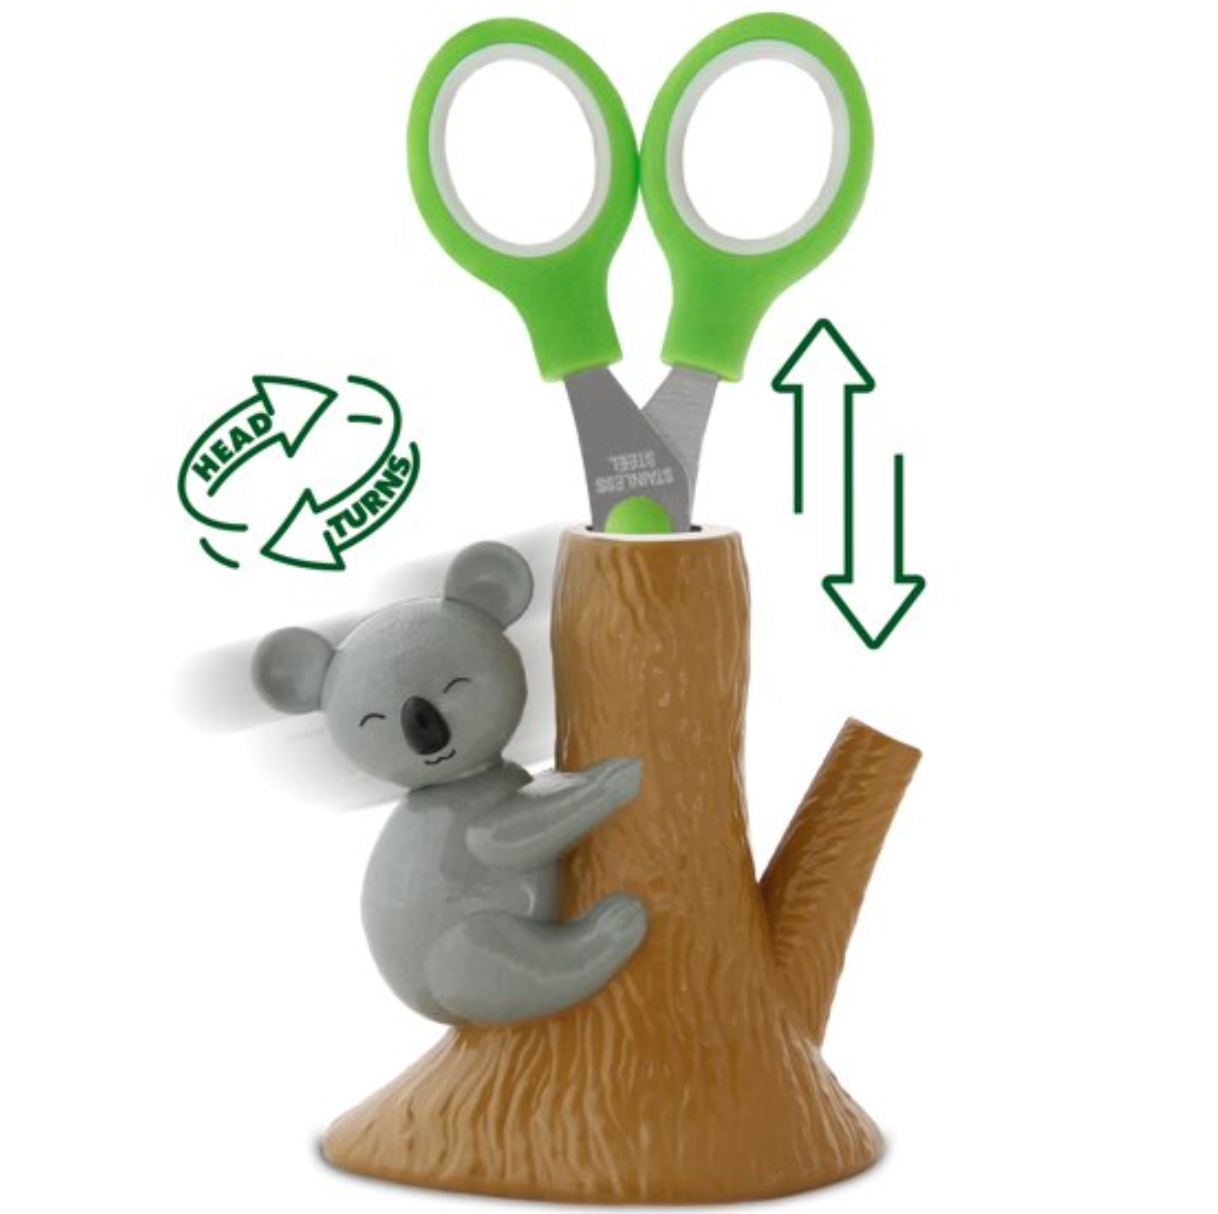 Scissors with Animated Koala Holder | Stainless Steel | Sized Right for Kids